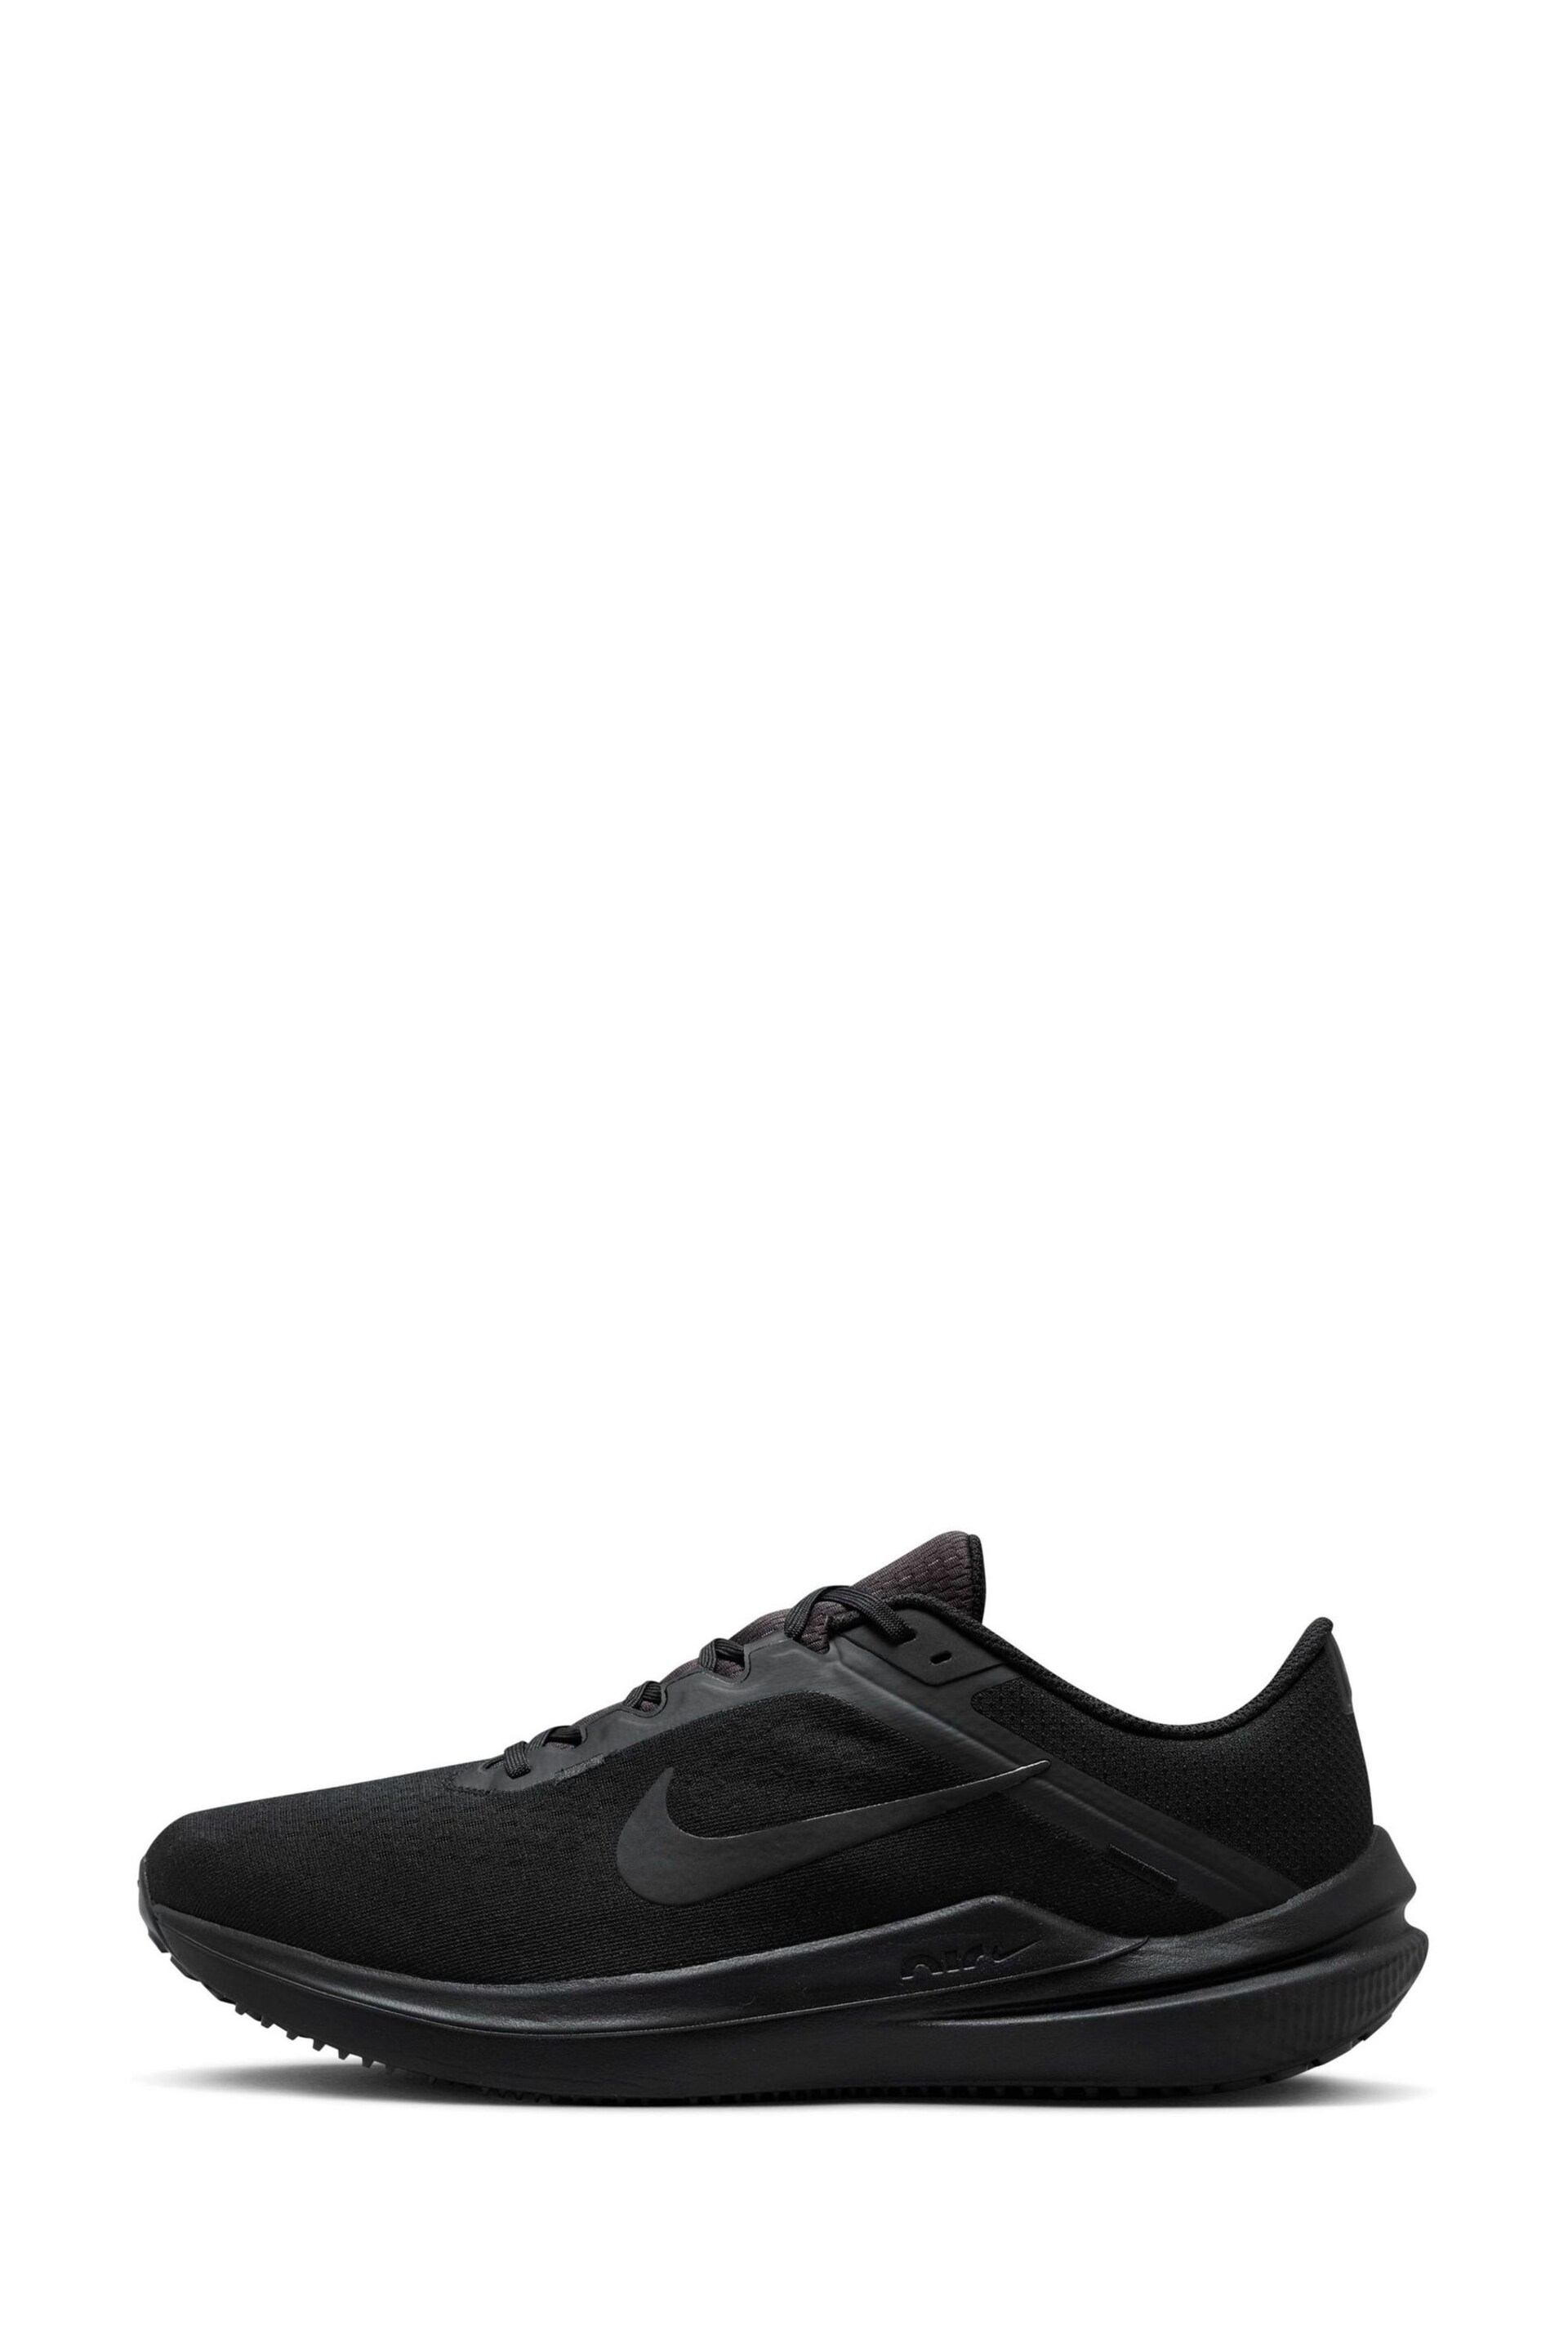 Nike Black Air Winflo 10 Running Trainers - Image 7 of 11